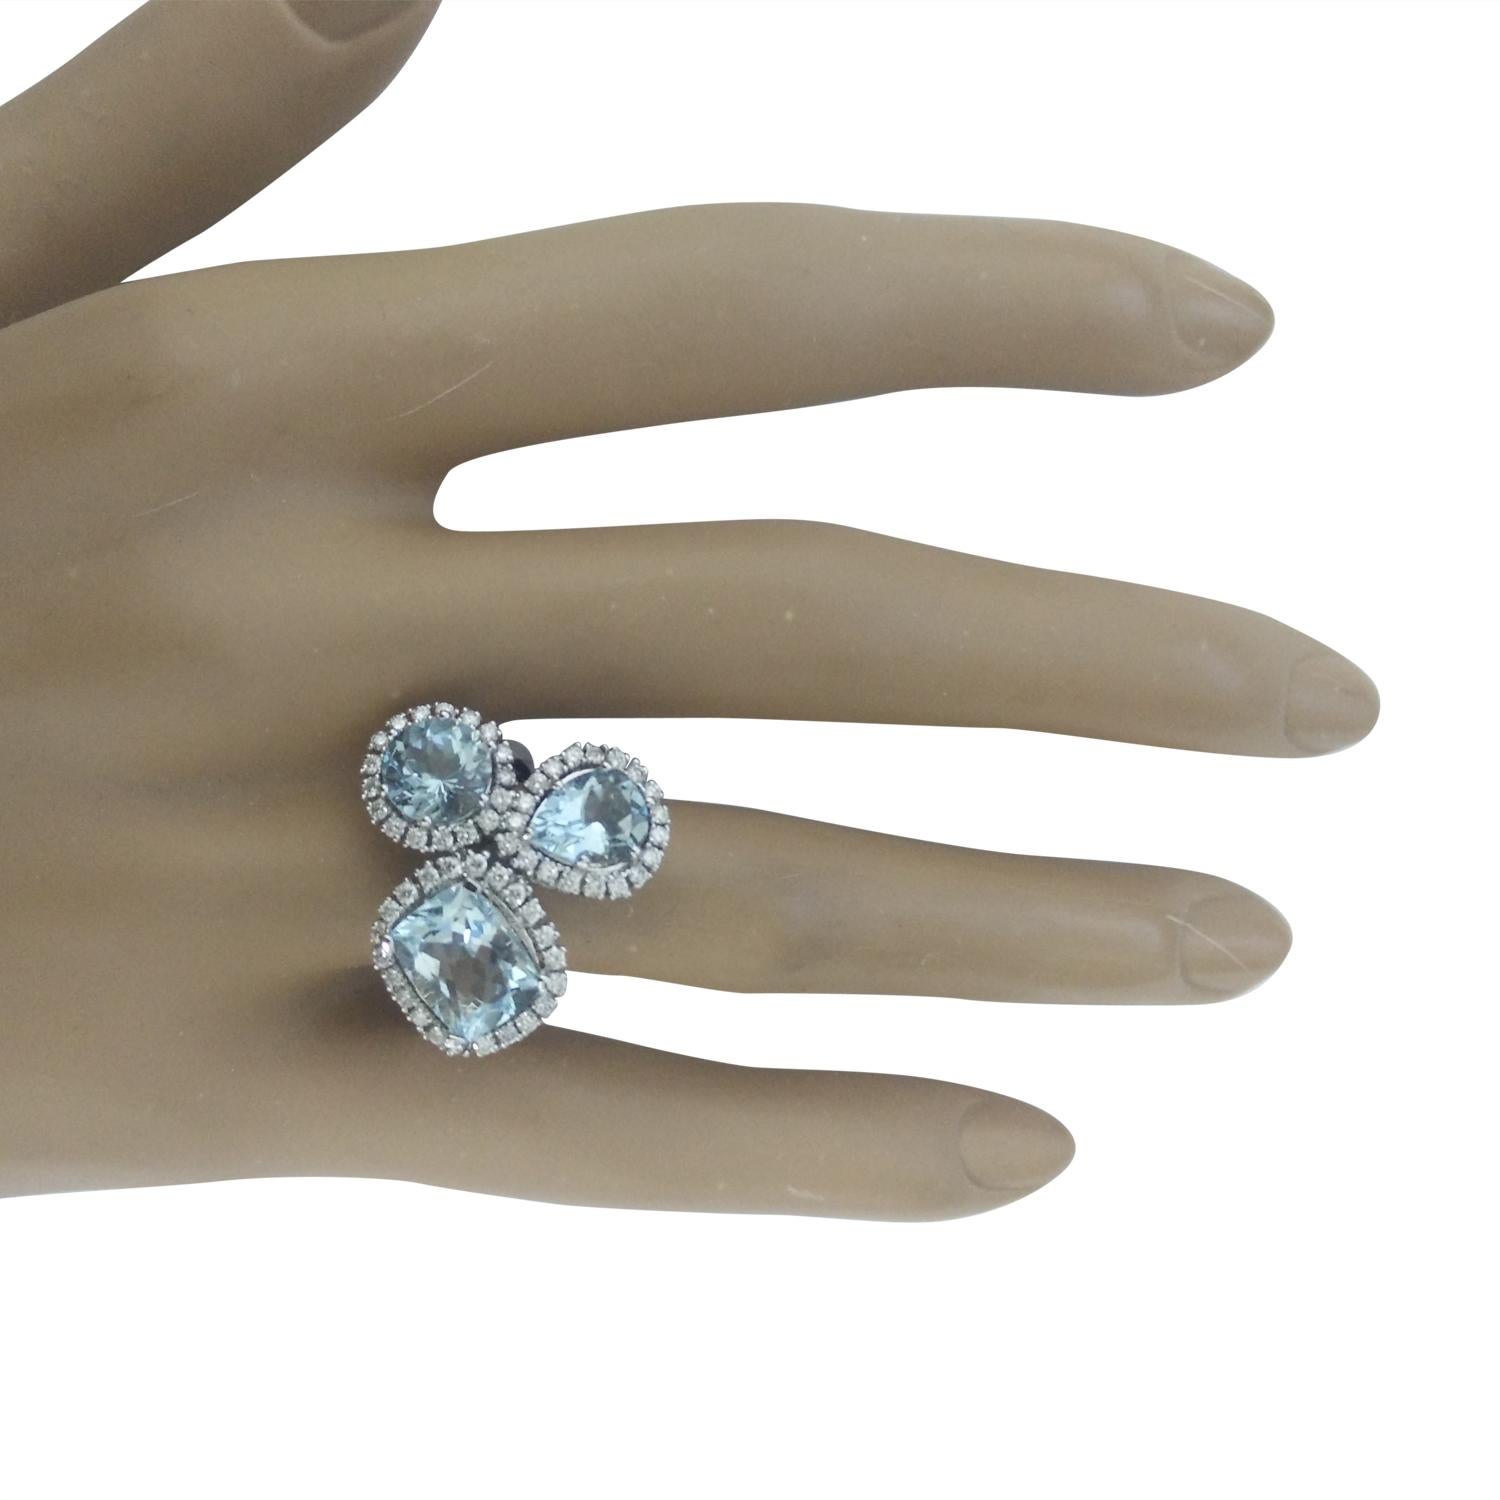 4.98 Carat Natural Aquamarine 14 Karat Solid White Gold Diamond Ring
Stamped: 14K
Total Ring Weight: 8.9 Grams 
Aquamarine Weight: 4.38 Carat  
Quantity: 3
Shape: Cushion, Round, Pear
Diamond Weight: 0.60 Carat (F-G Color, VS2-SI1 Clarity